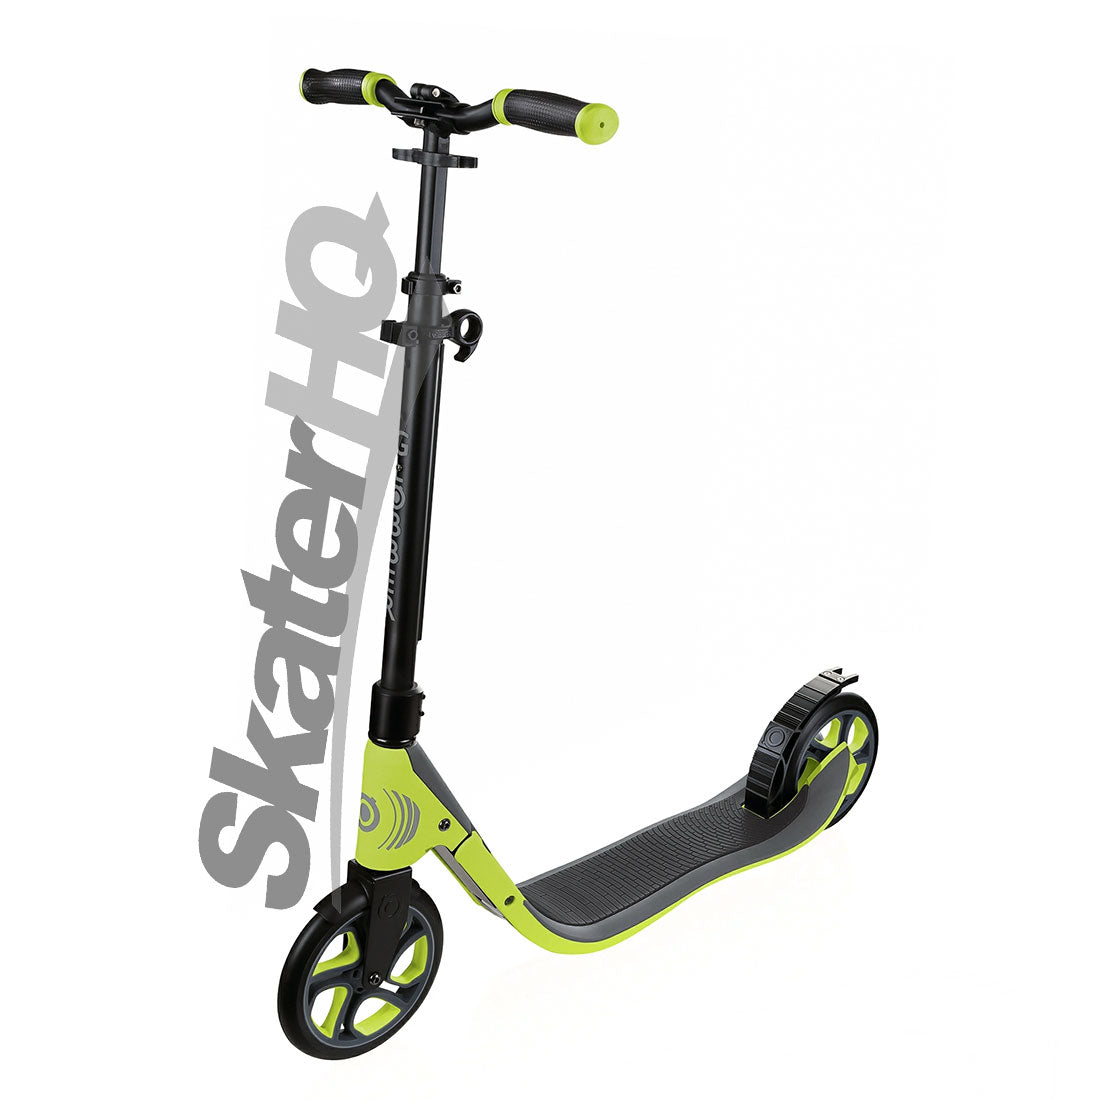 Globber ONE NL 205 Scooter - Green/Grey Scooter Completes Rec